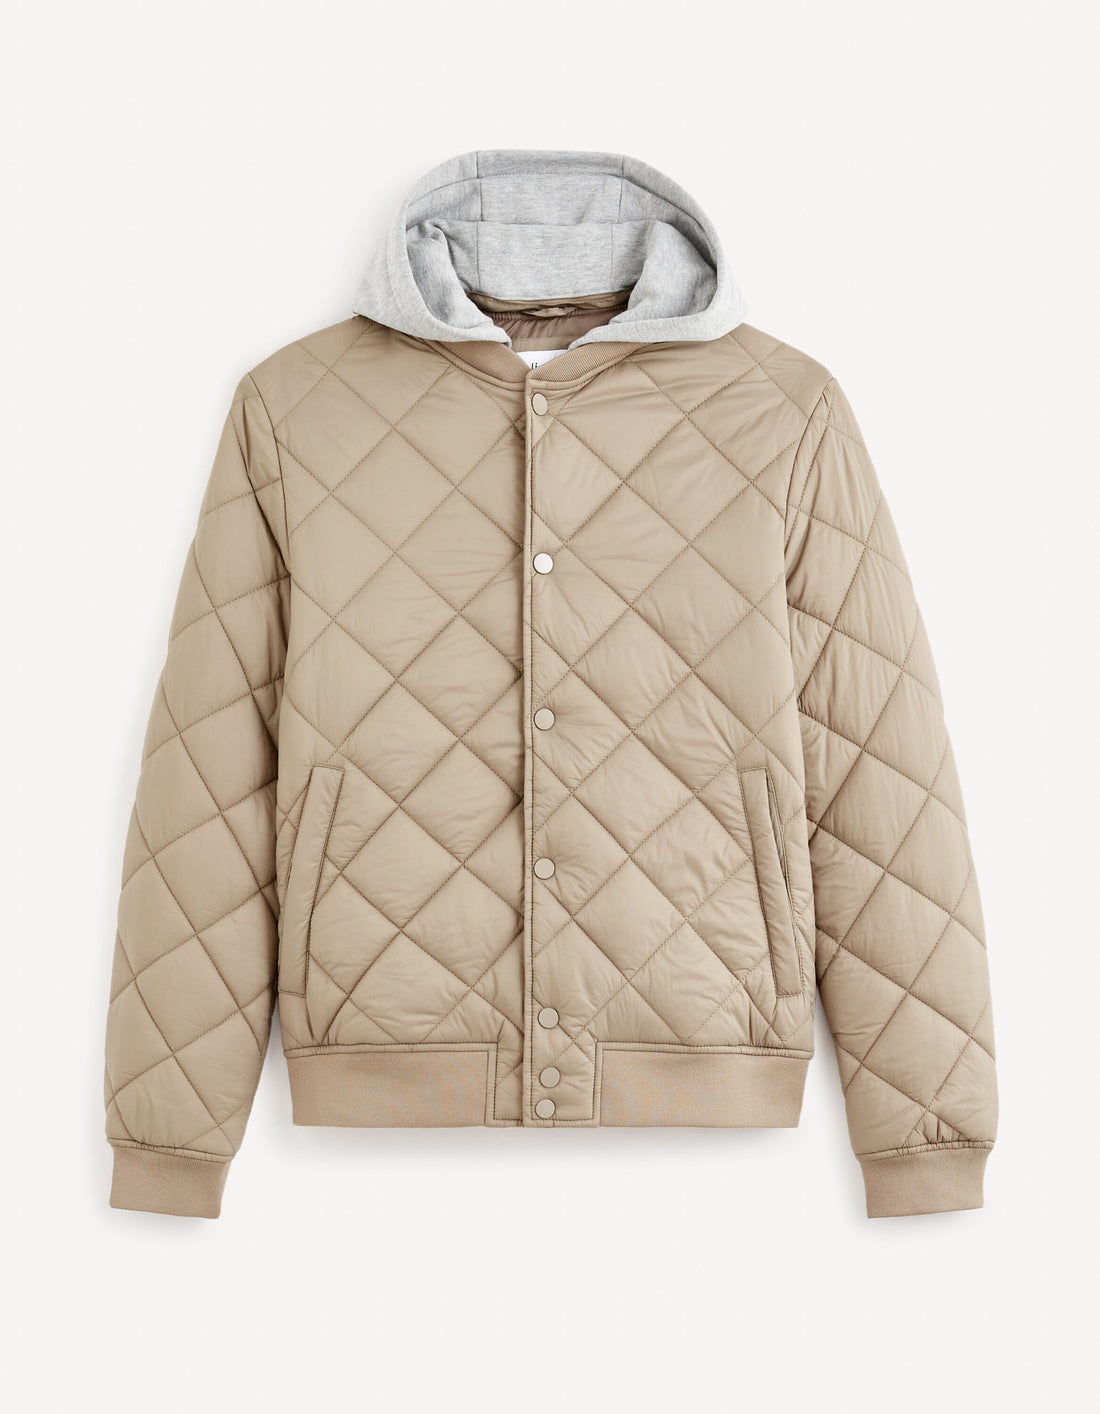 Hooded Bomber Jacket_FUQUILTED_BEIGE_02